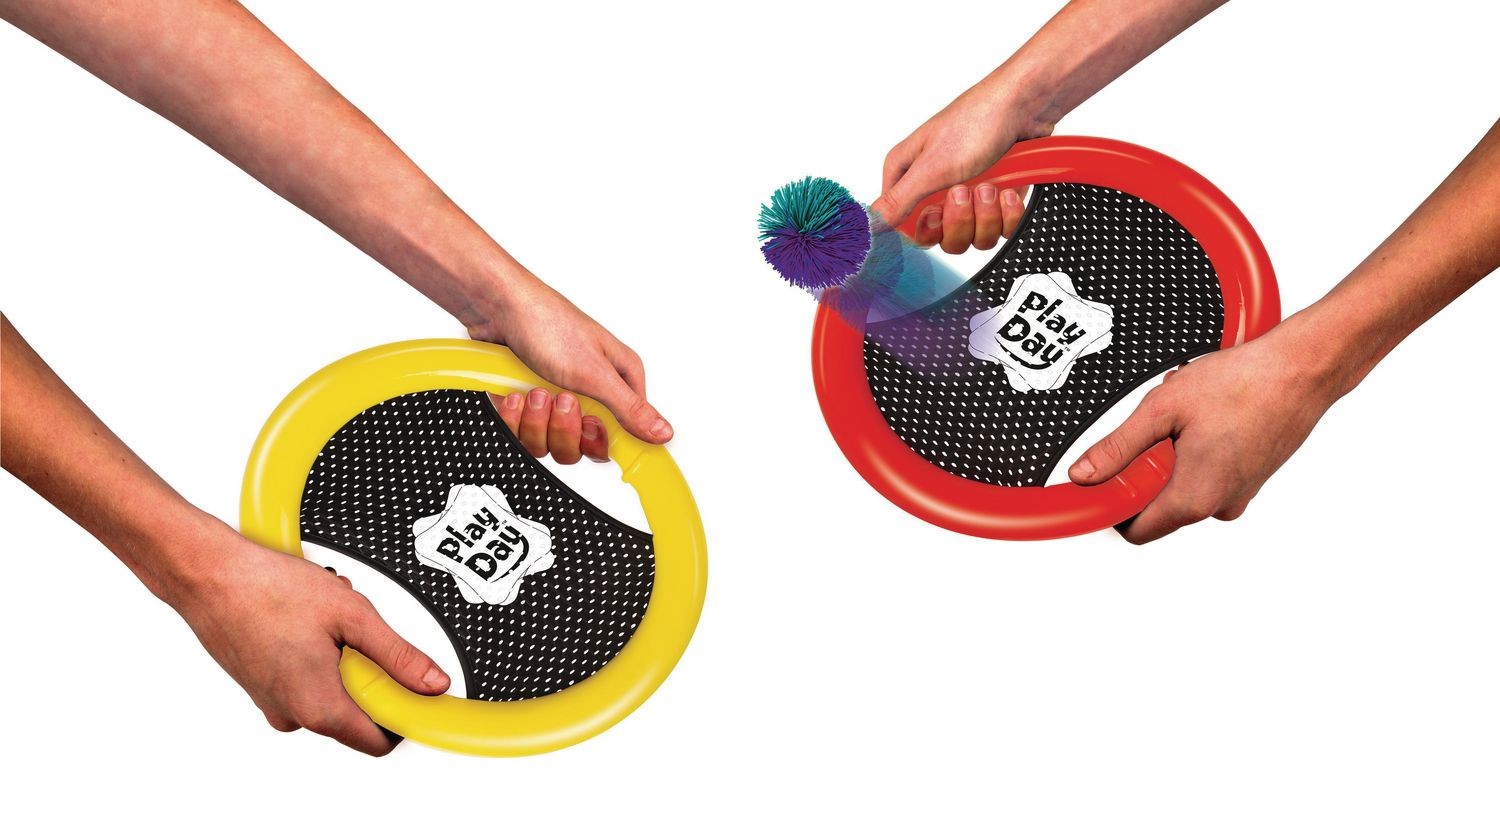 NEW SUMMER VIBES 2 IN 1 XTREME POWER PADDLES TWO PLAYER GAME SET 